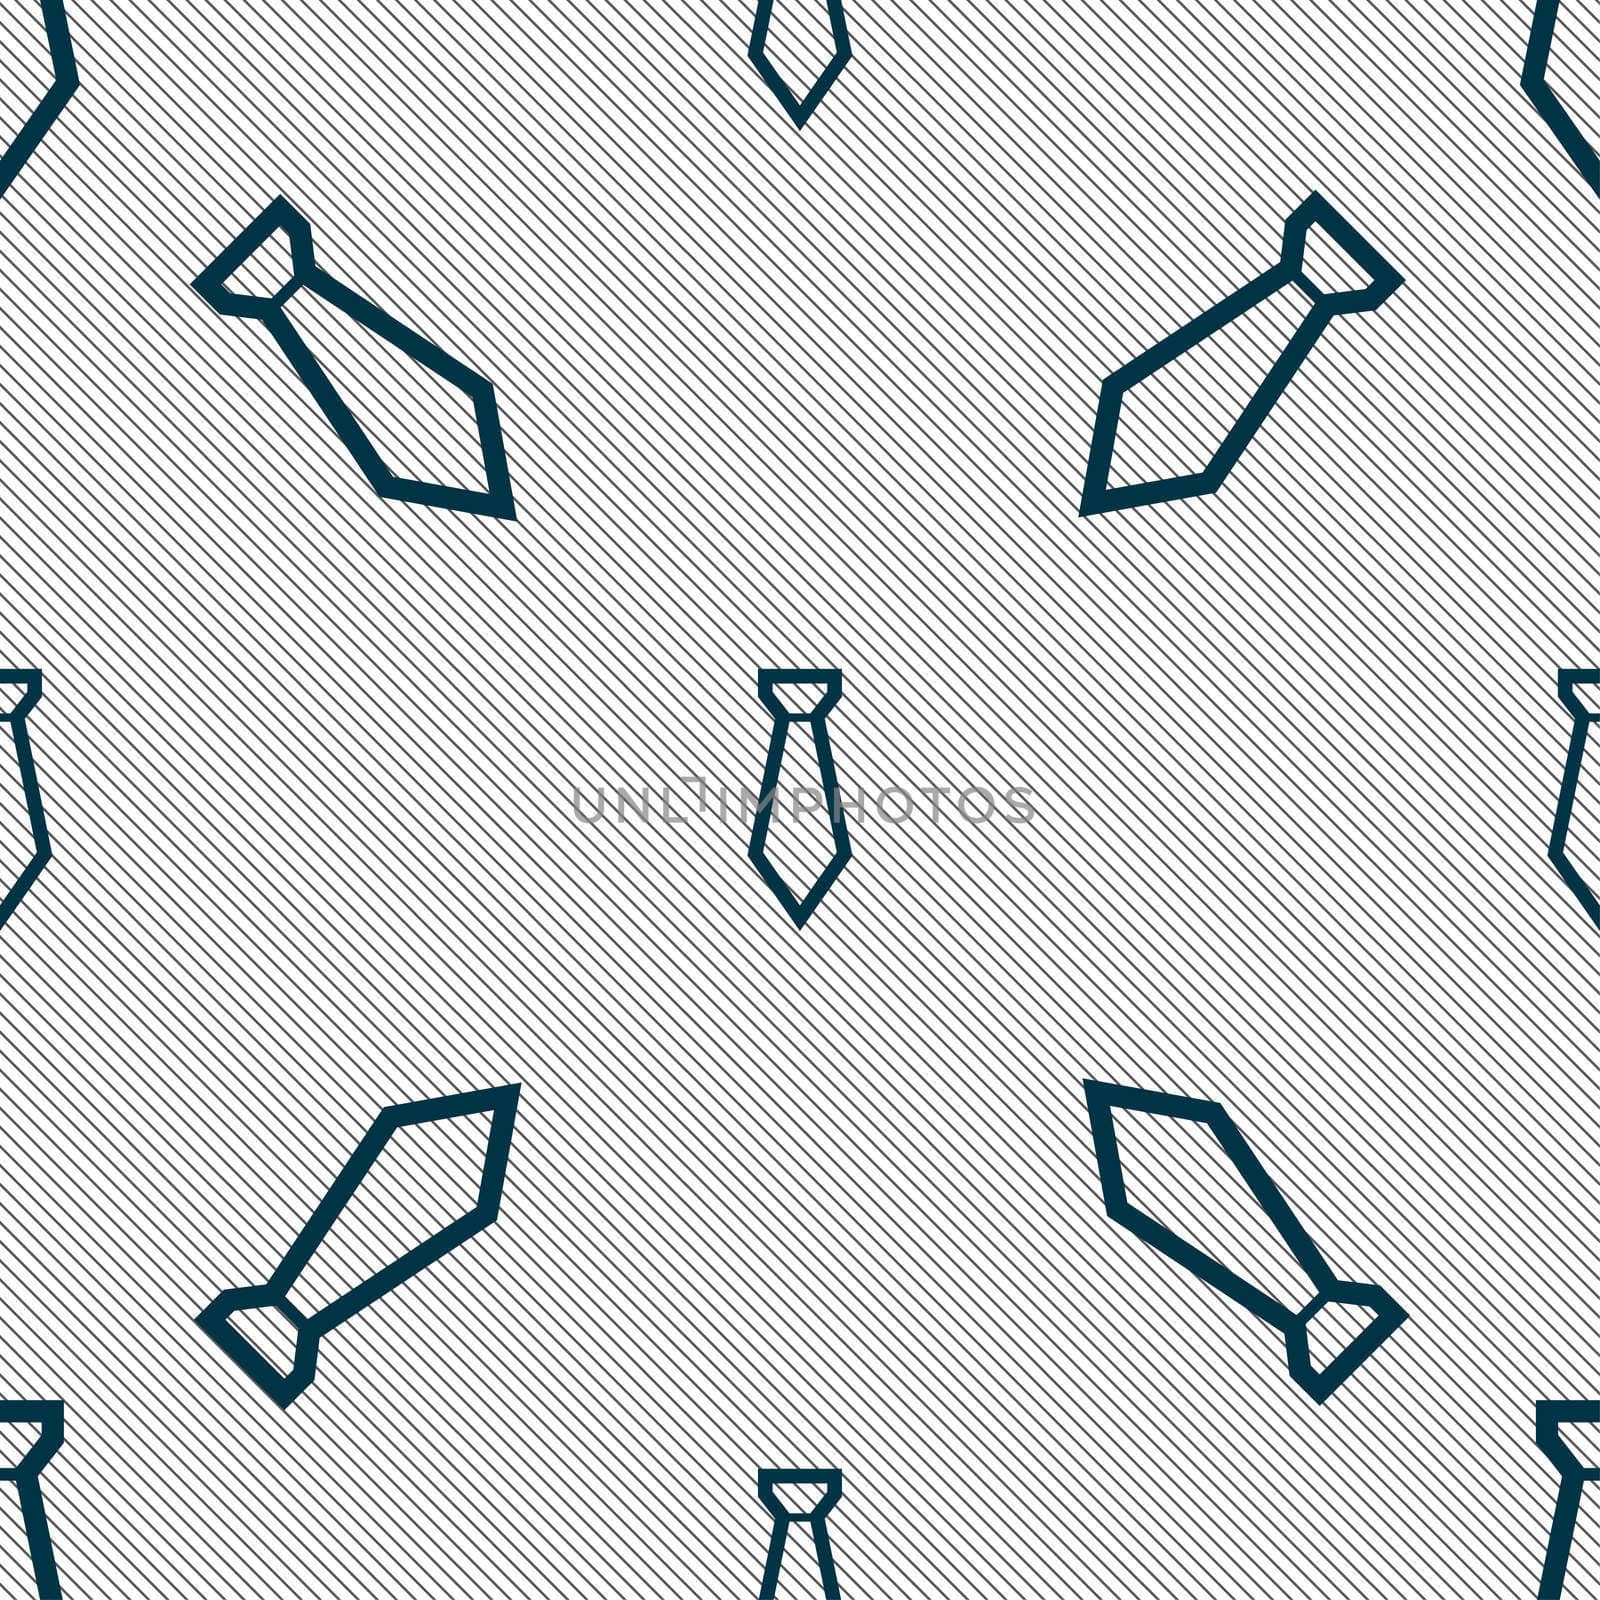 Tie icon sign. Seamless pattern with geometric texture.  by serhii_lohvyniuk